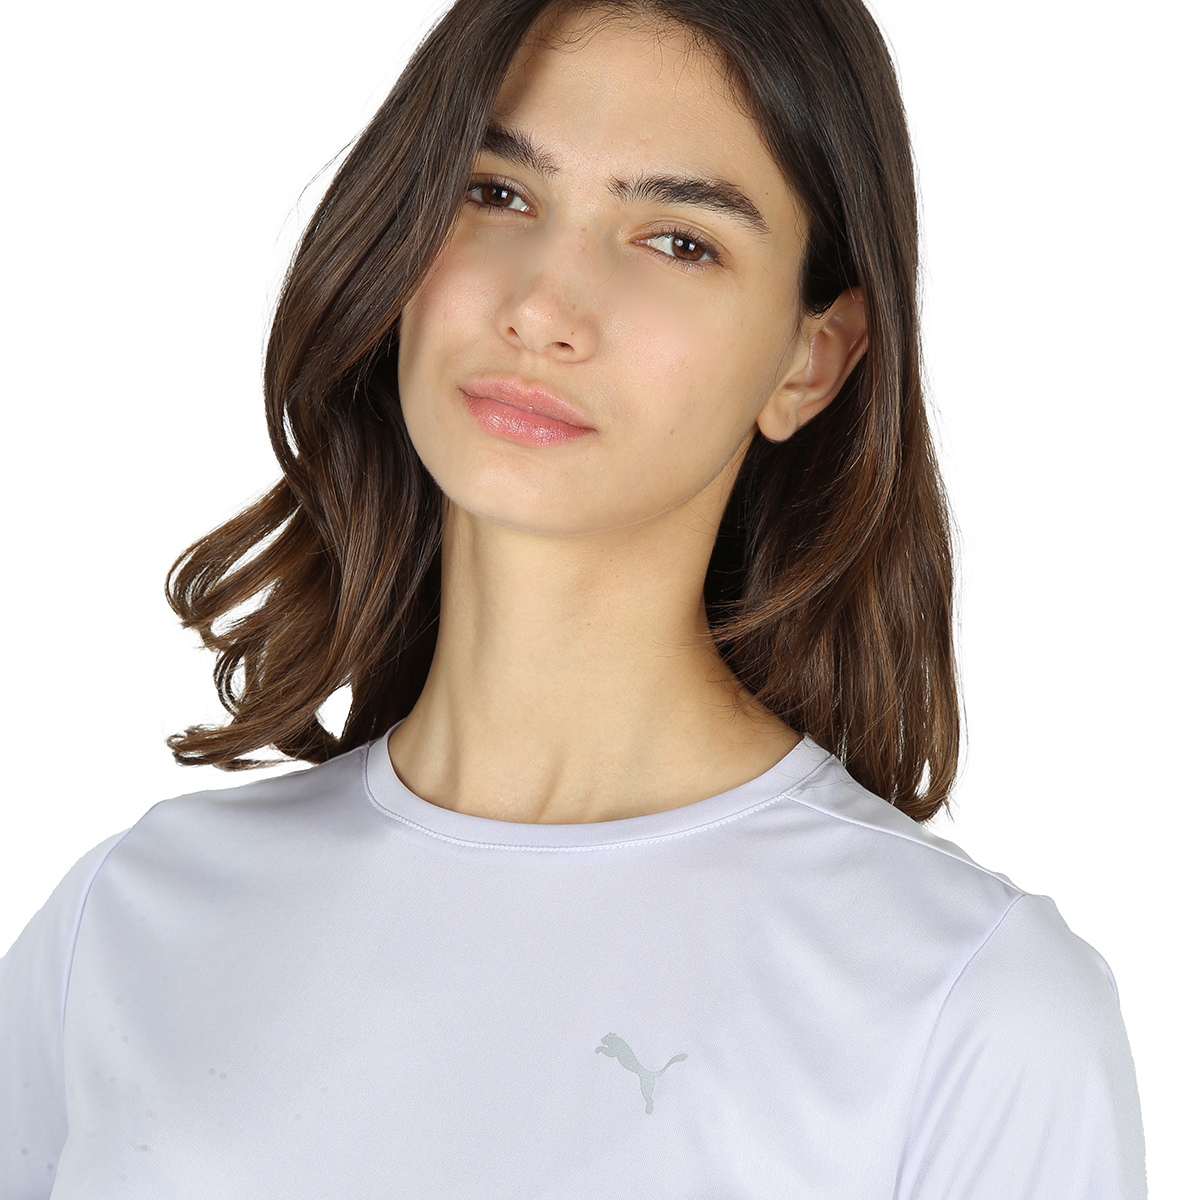 Remera Running Puma Favorite Ss Mujer,  image number null